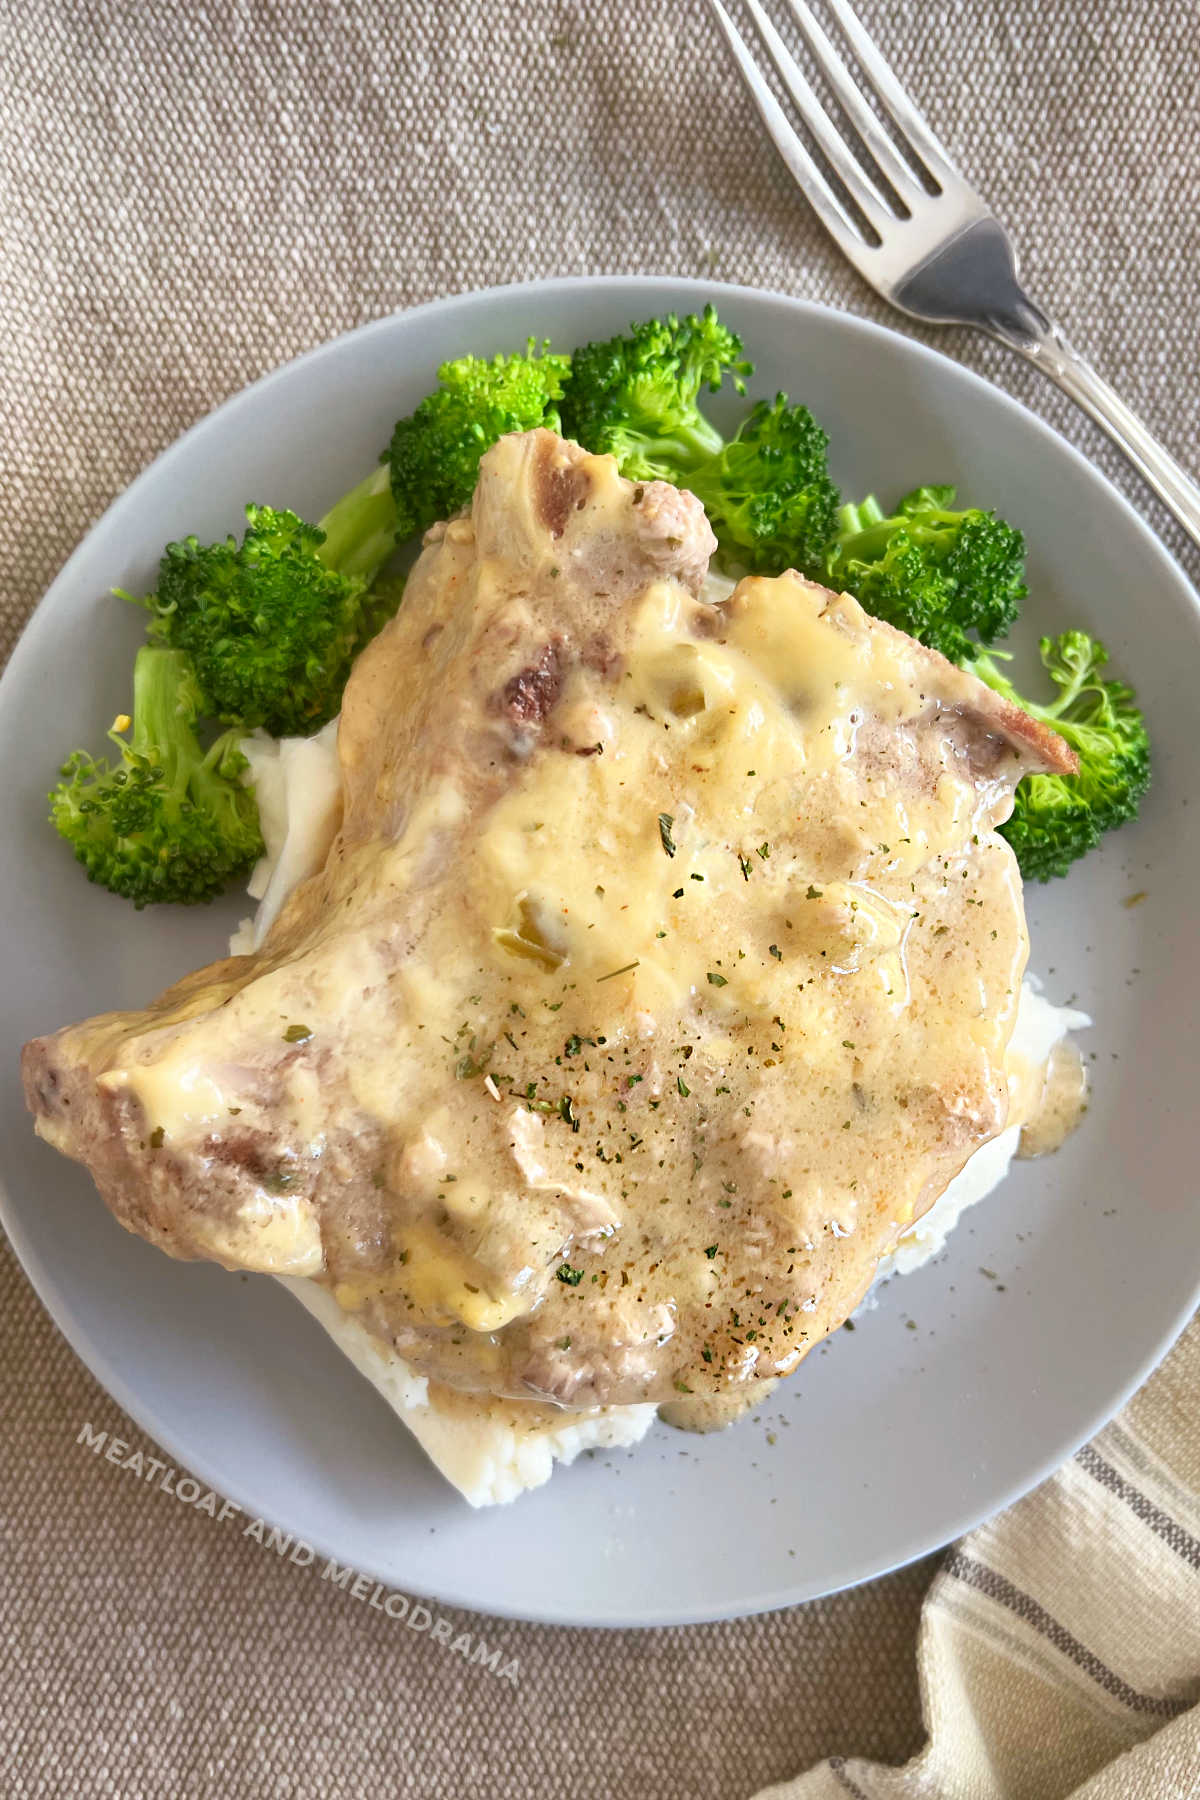 bone-in pork chop with creamy gravy over mashed potatoes and broccoli